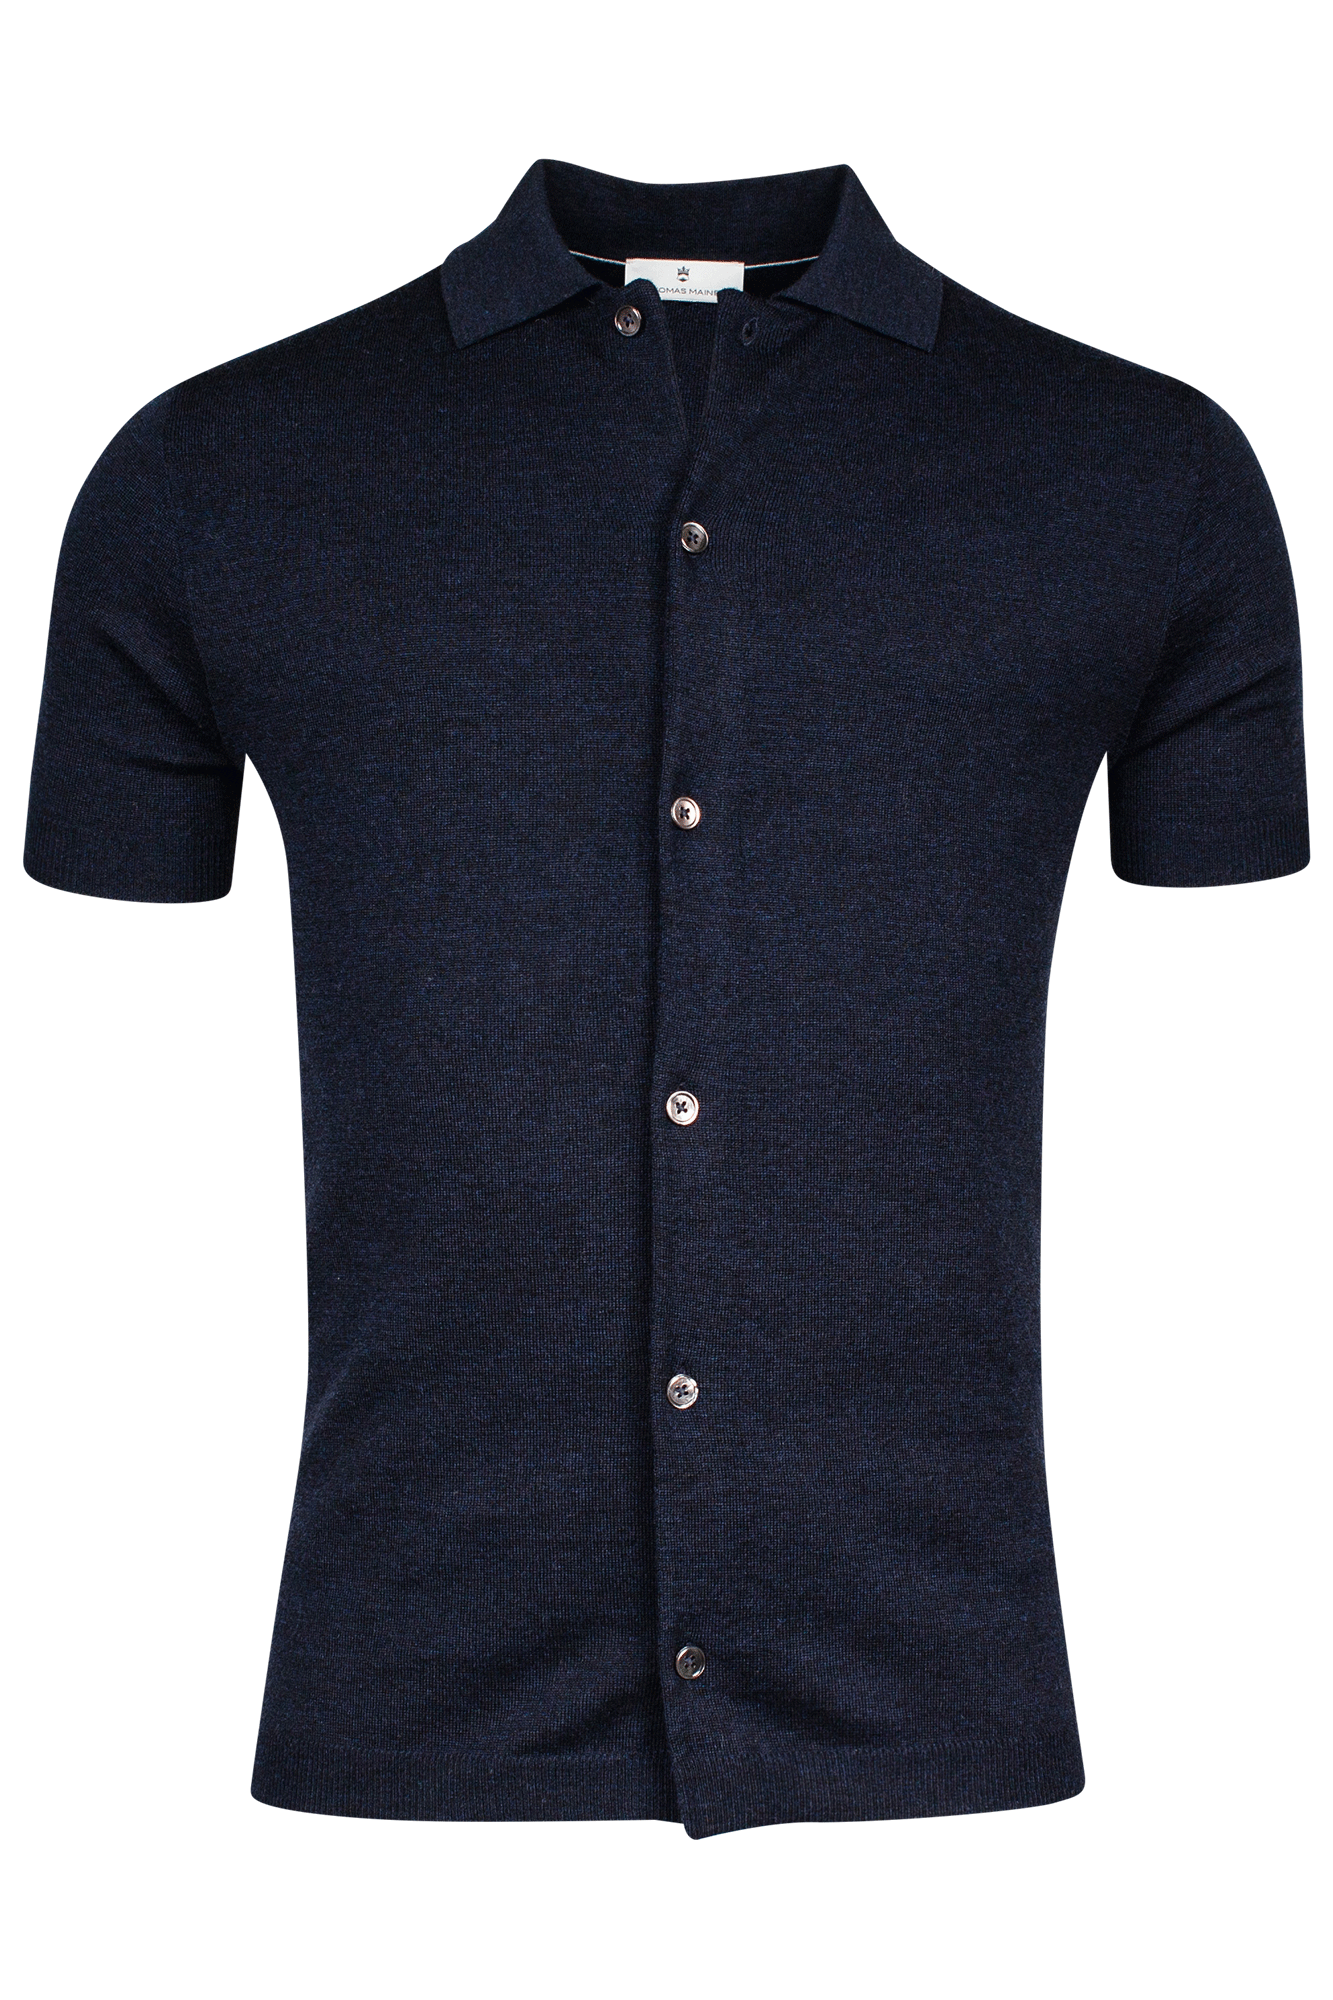 Overshirt Knitted, Polo Collar/ Short Sleeves